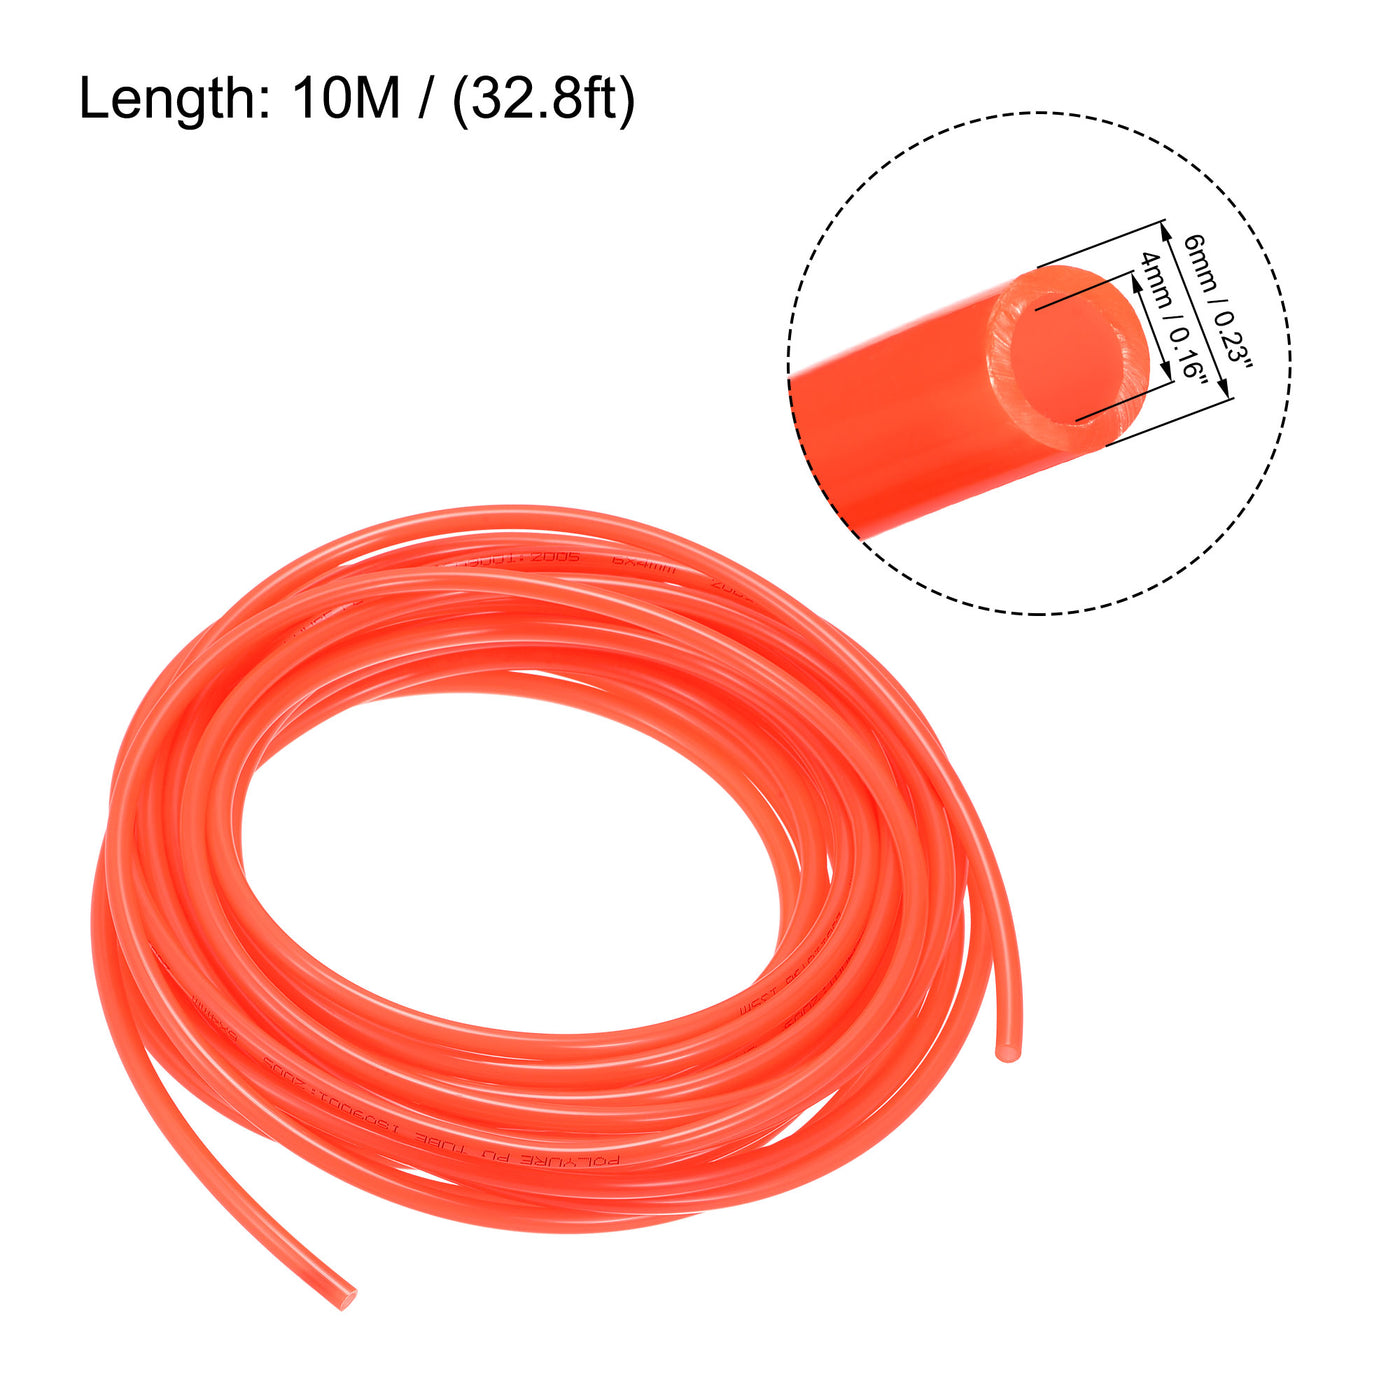 uxcell Uxcell Pneumatic Air Hose Tubing Air Compressor Tube 4mm/0.16''ID x 6mm/0.23''OD x 10m/32.8Ft Polyurethane Pipe Bright Orange with Connect Fitting Kit